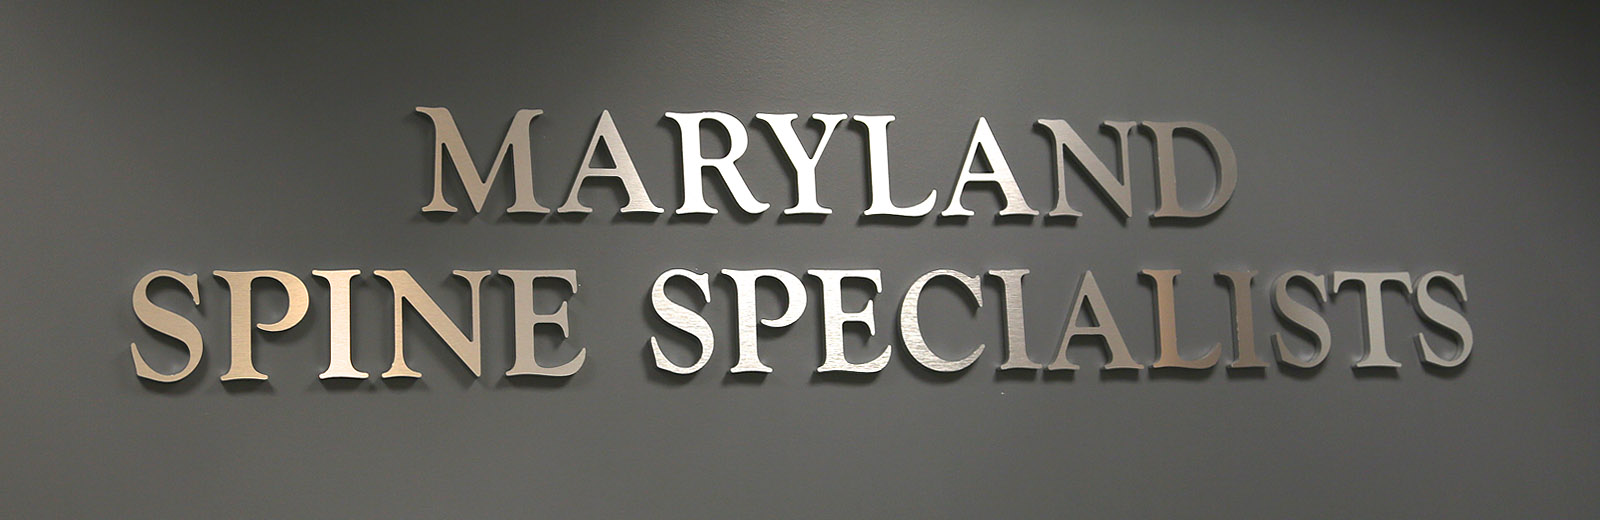 Maryland Spine Specialists